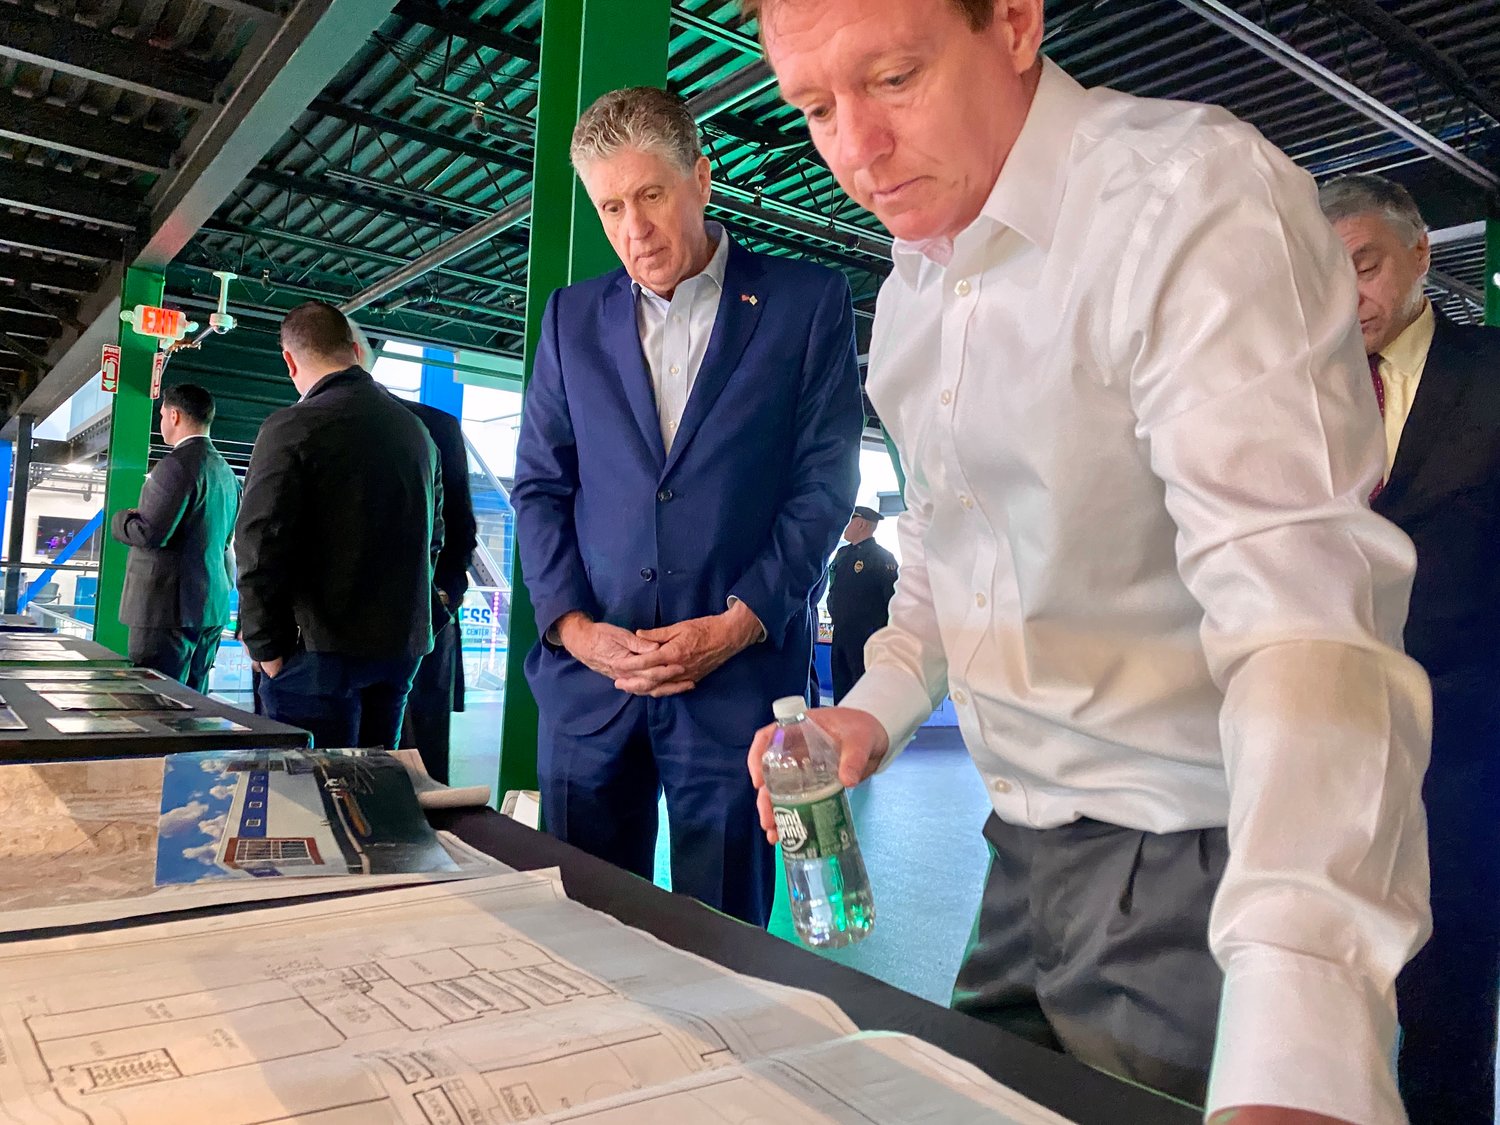 Longplex owner Jim Long (right) and Rhode Island Gov. Dan McKee go over original blueprints from the complex's construction, which began four years ago.